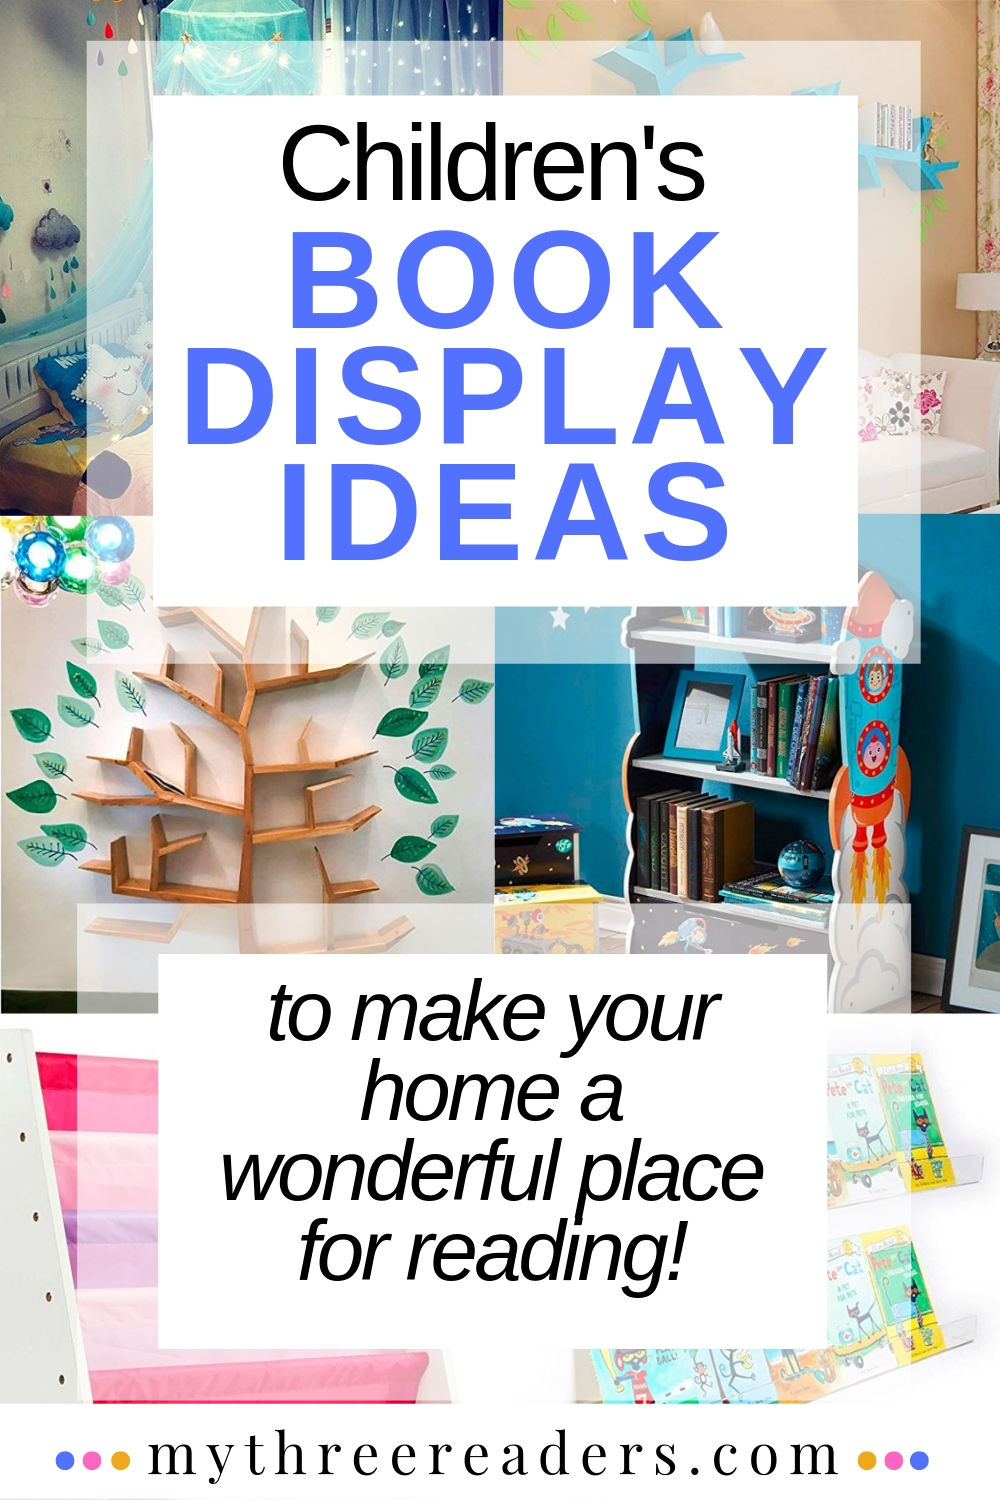 children's book display ideas and reading nook ideas